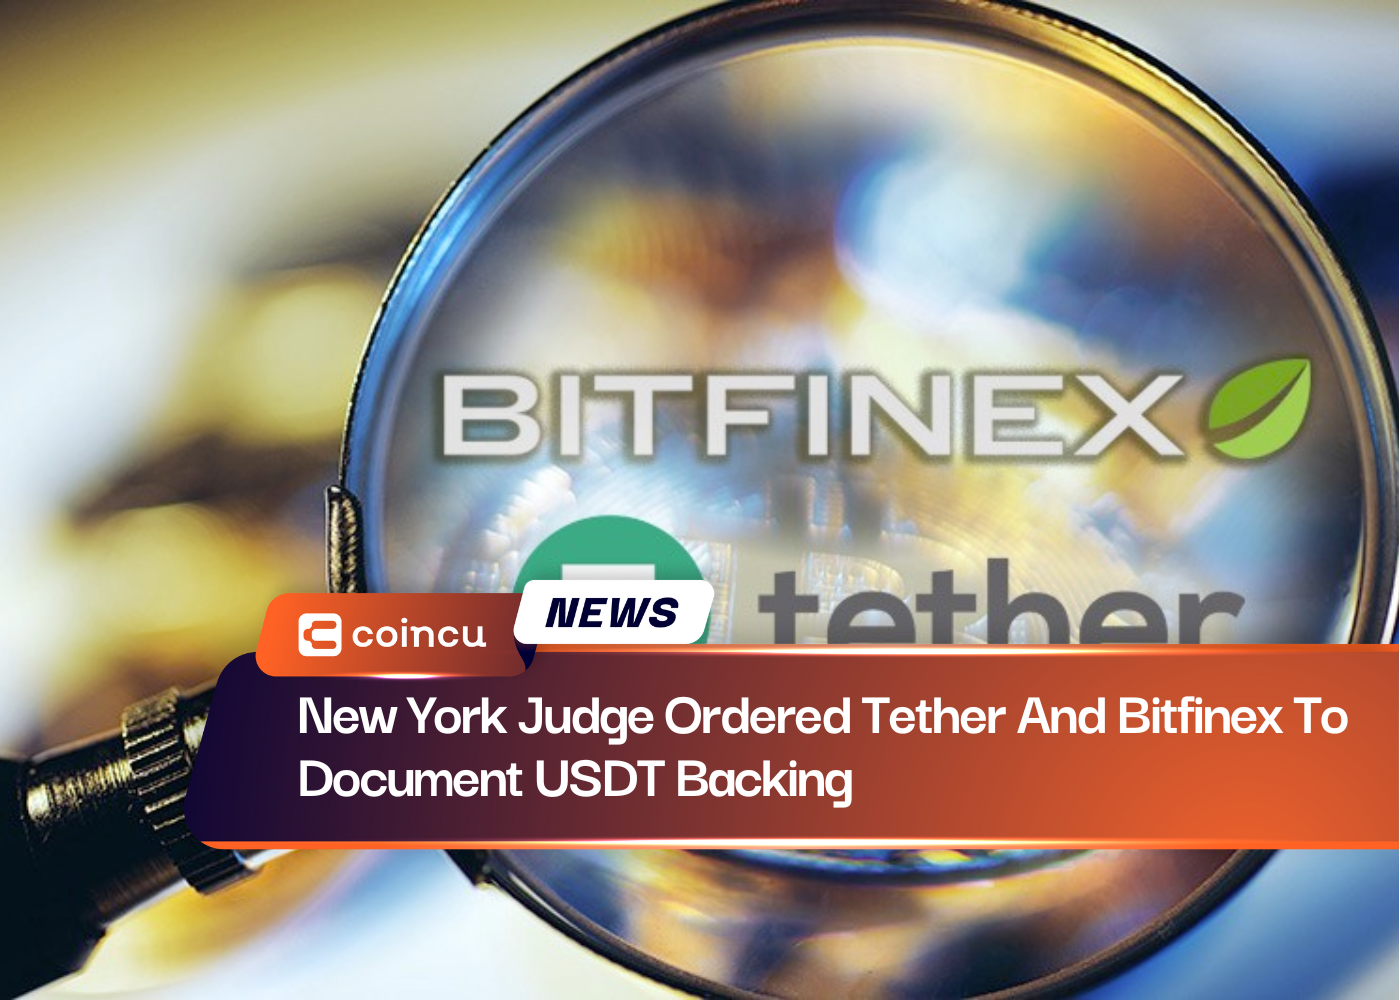 New York Judge Ordered Tether And Bitfinex To Document USDT Backing